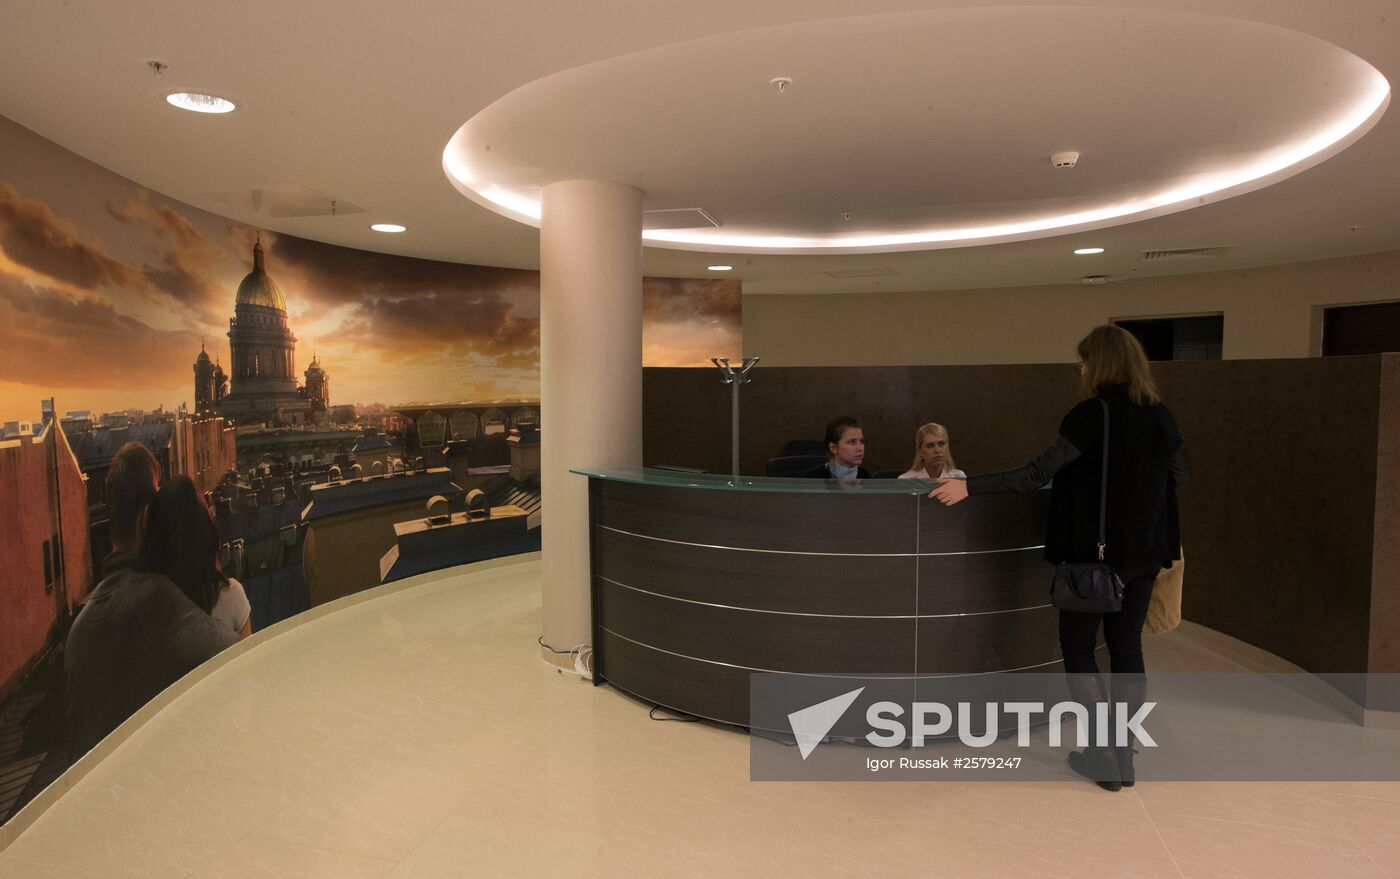 The renovated Pulkovo-1 airport terminal in St. Petersburg